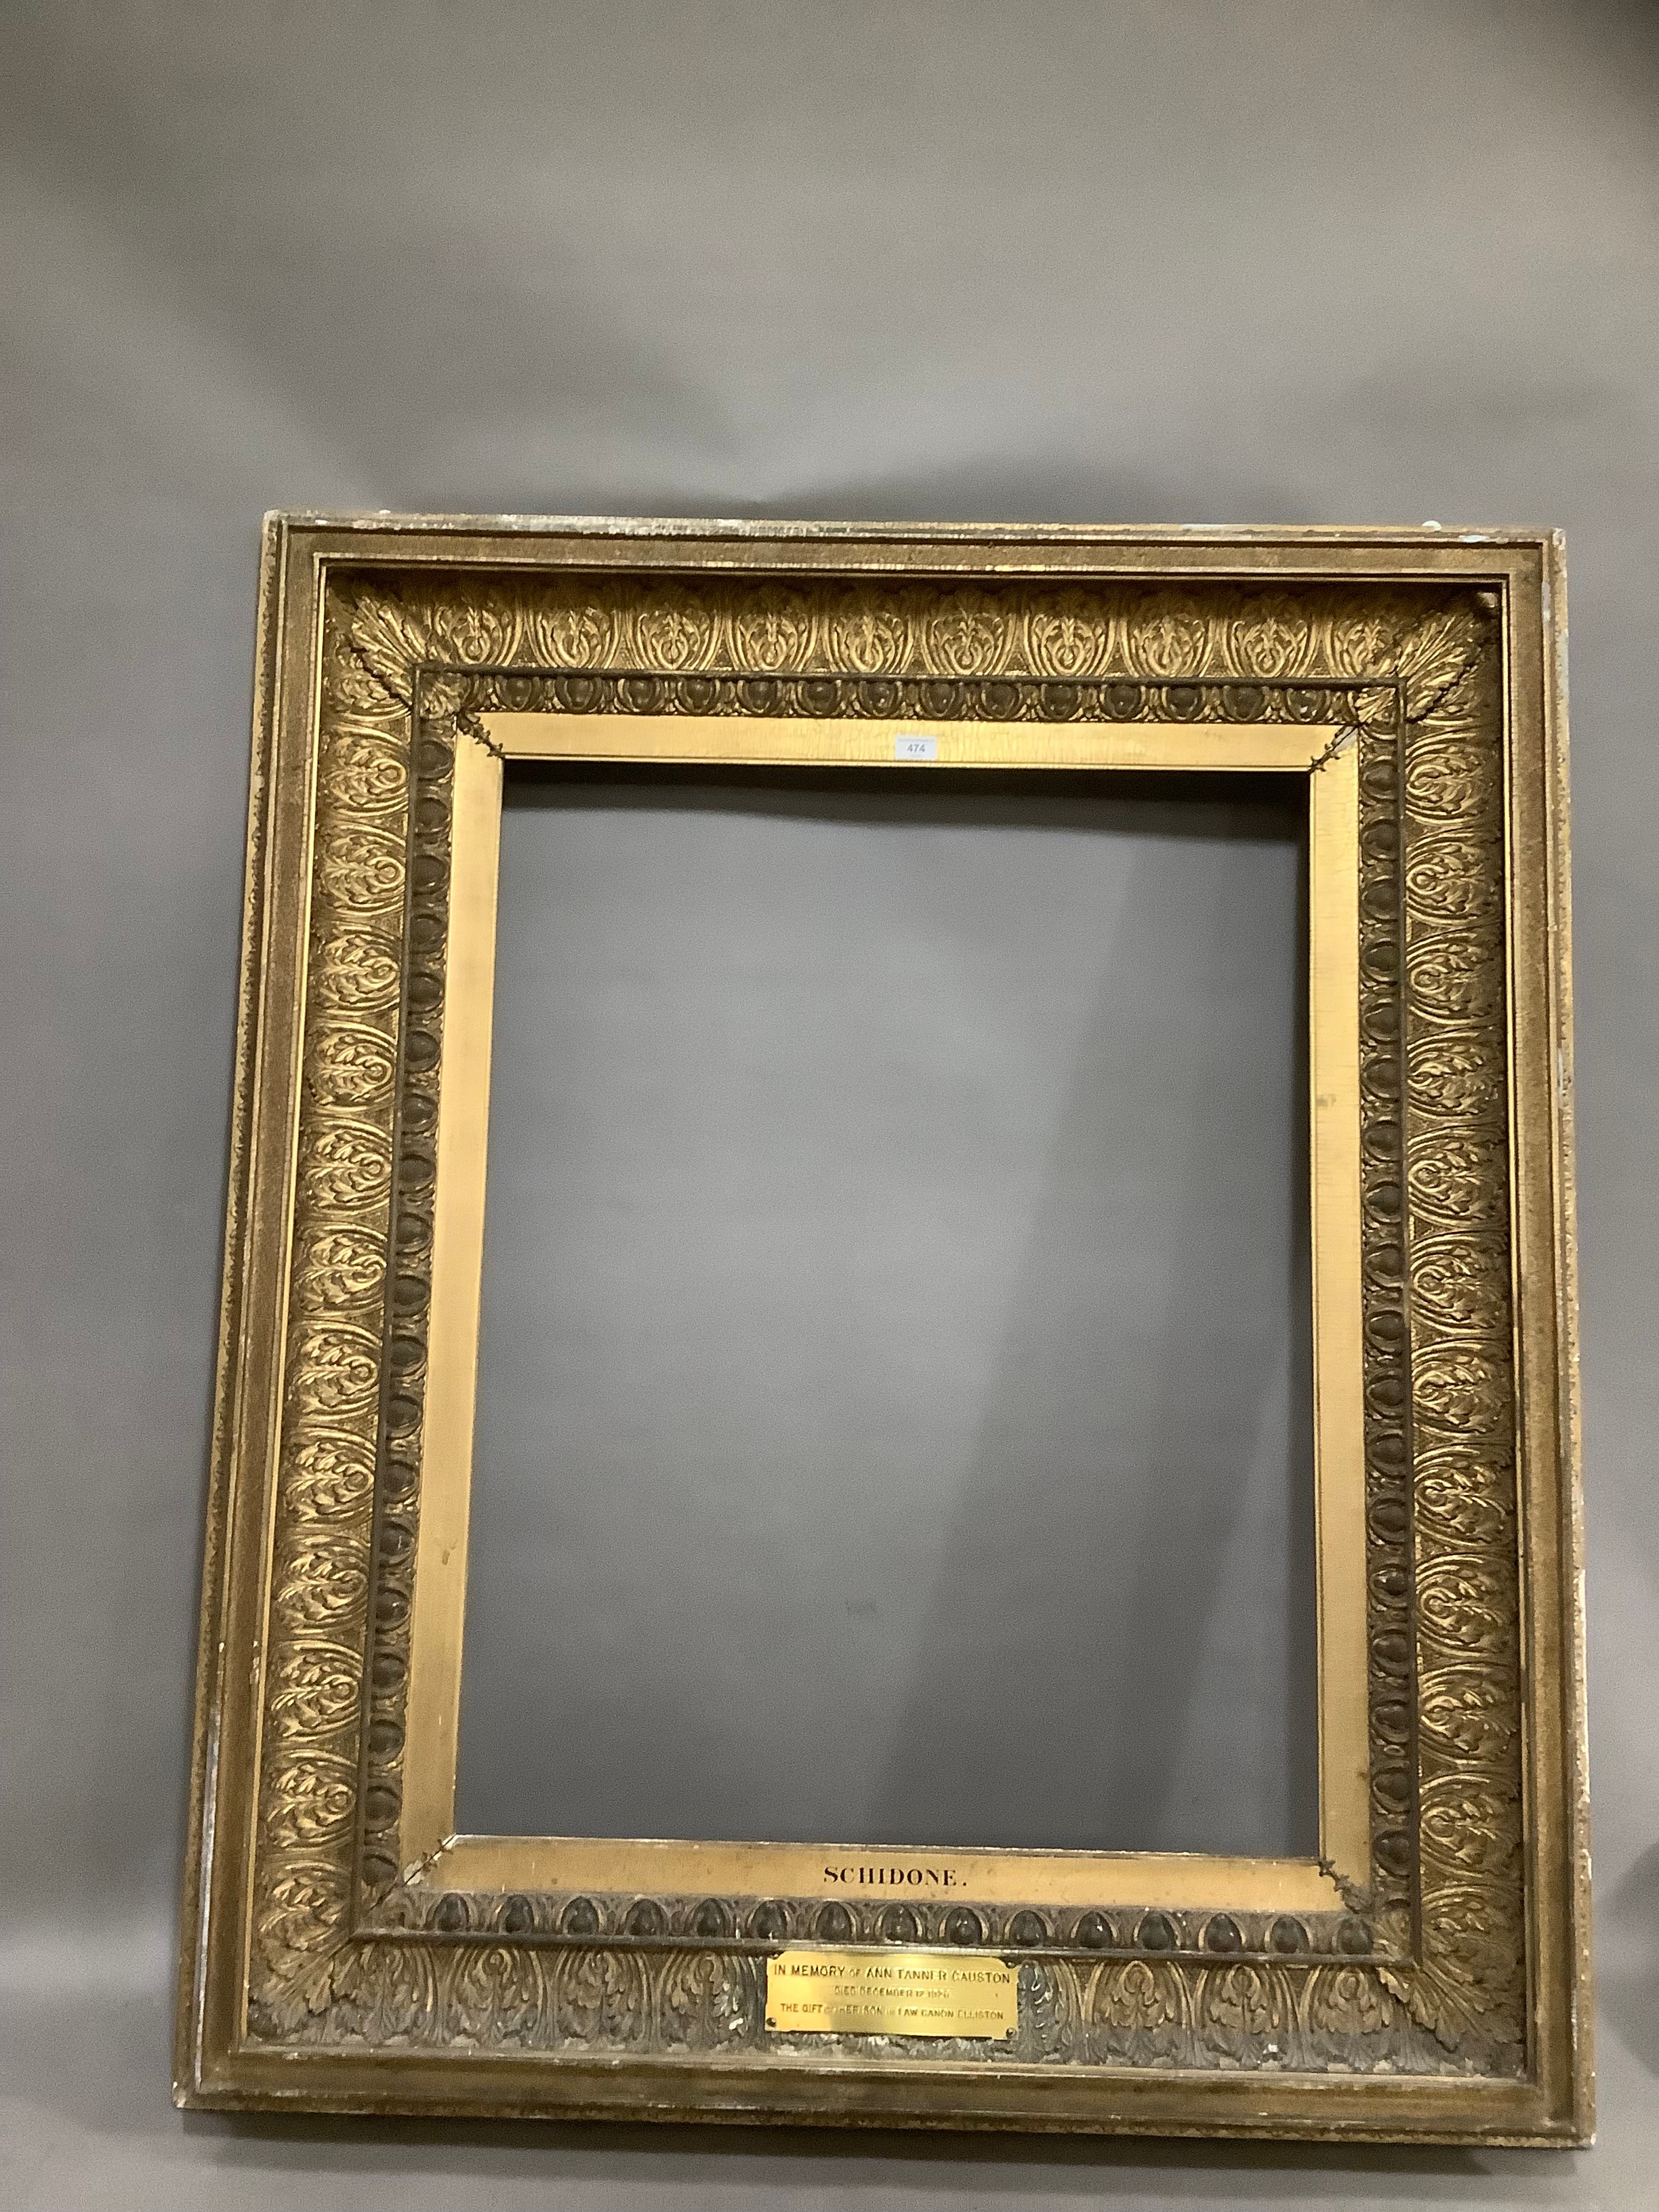 A 19th century giltwood picture frame with projecting moulding, acanthus leaf surround and egg and